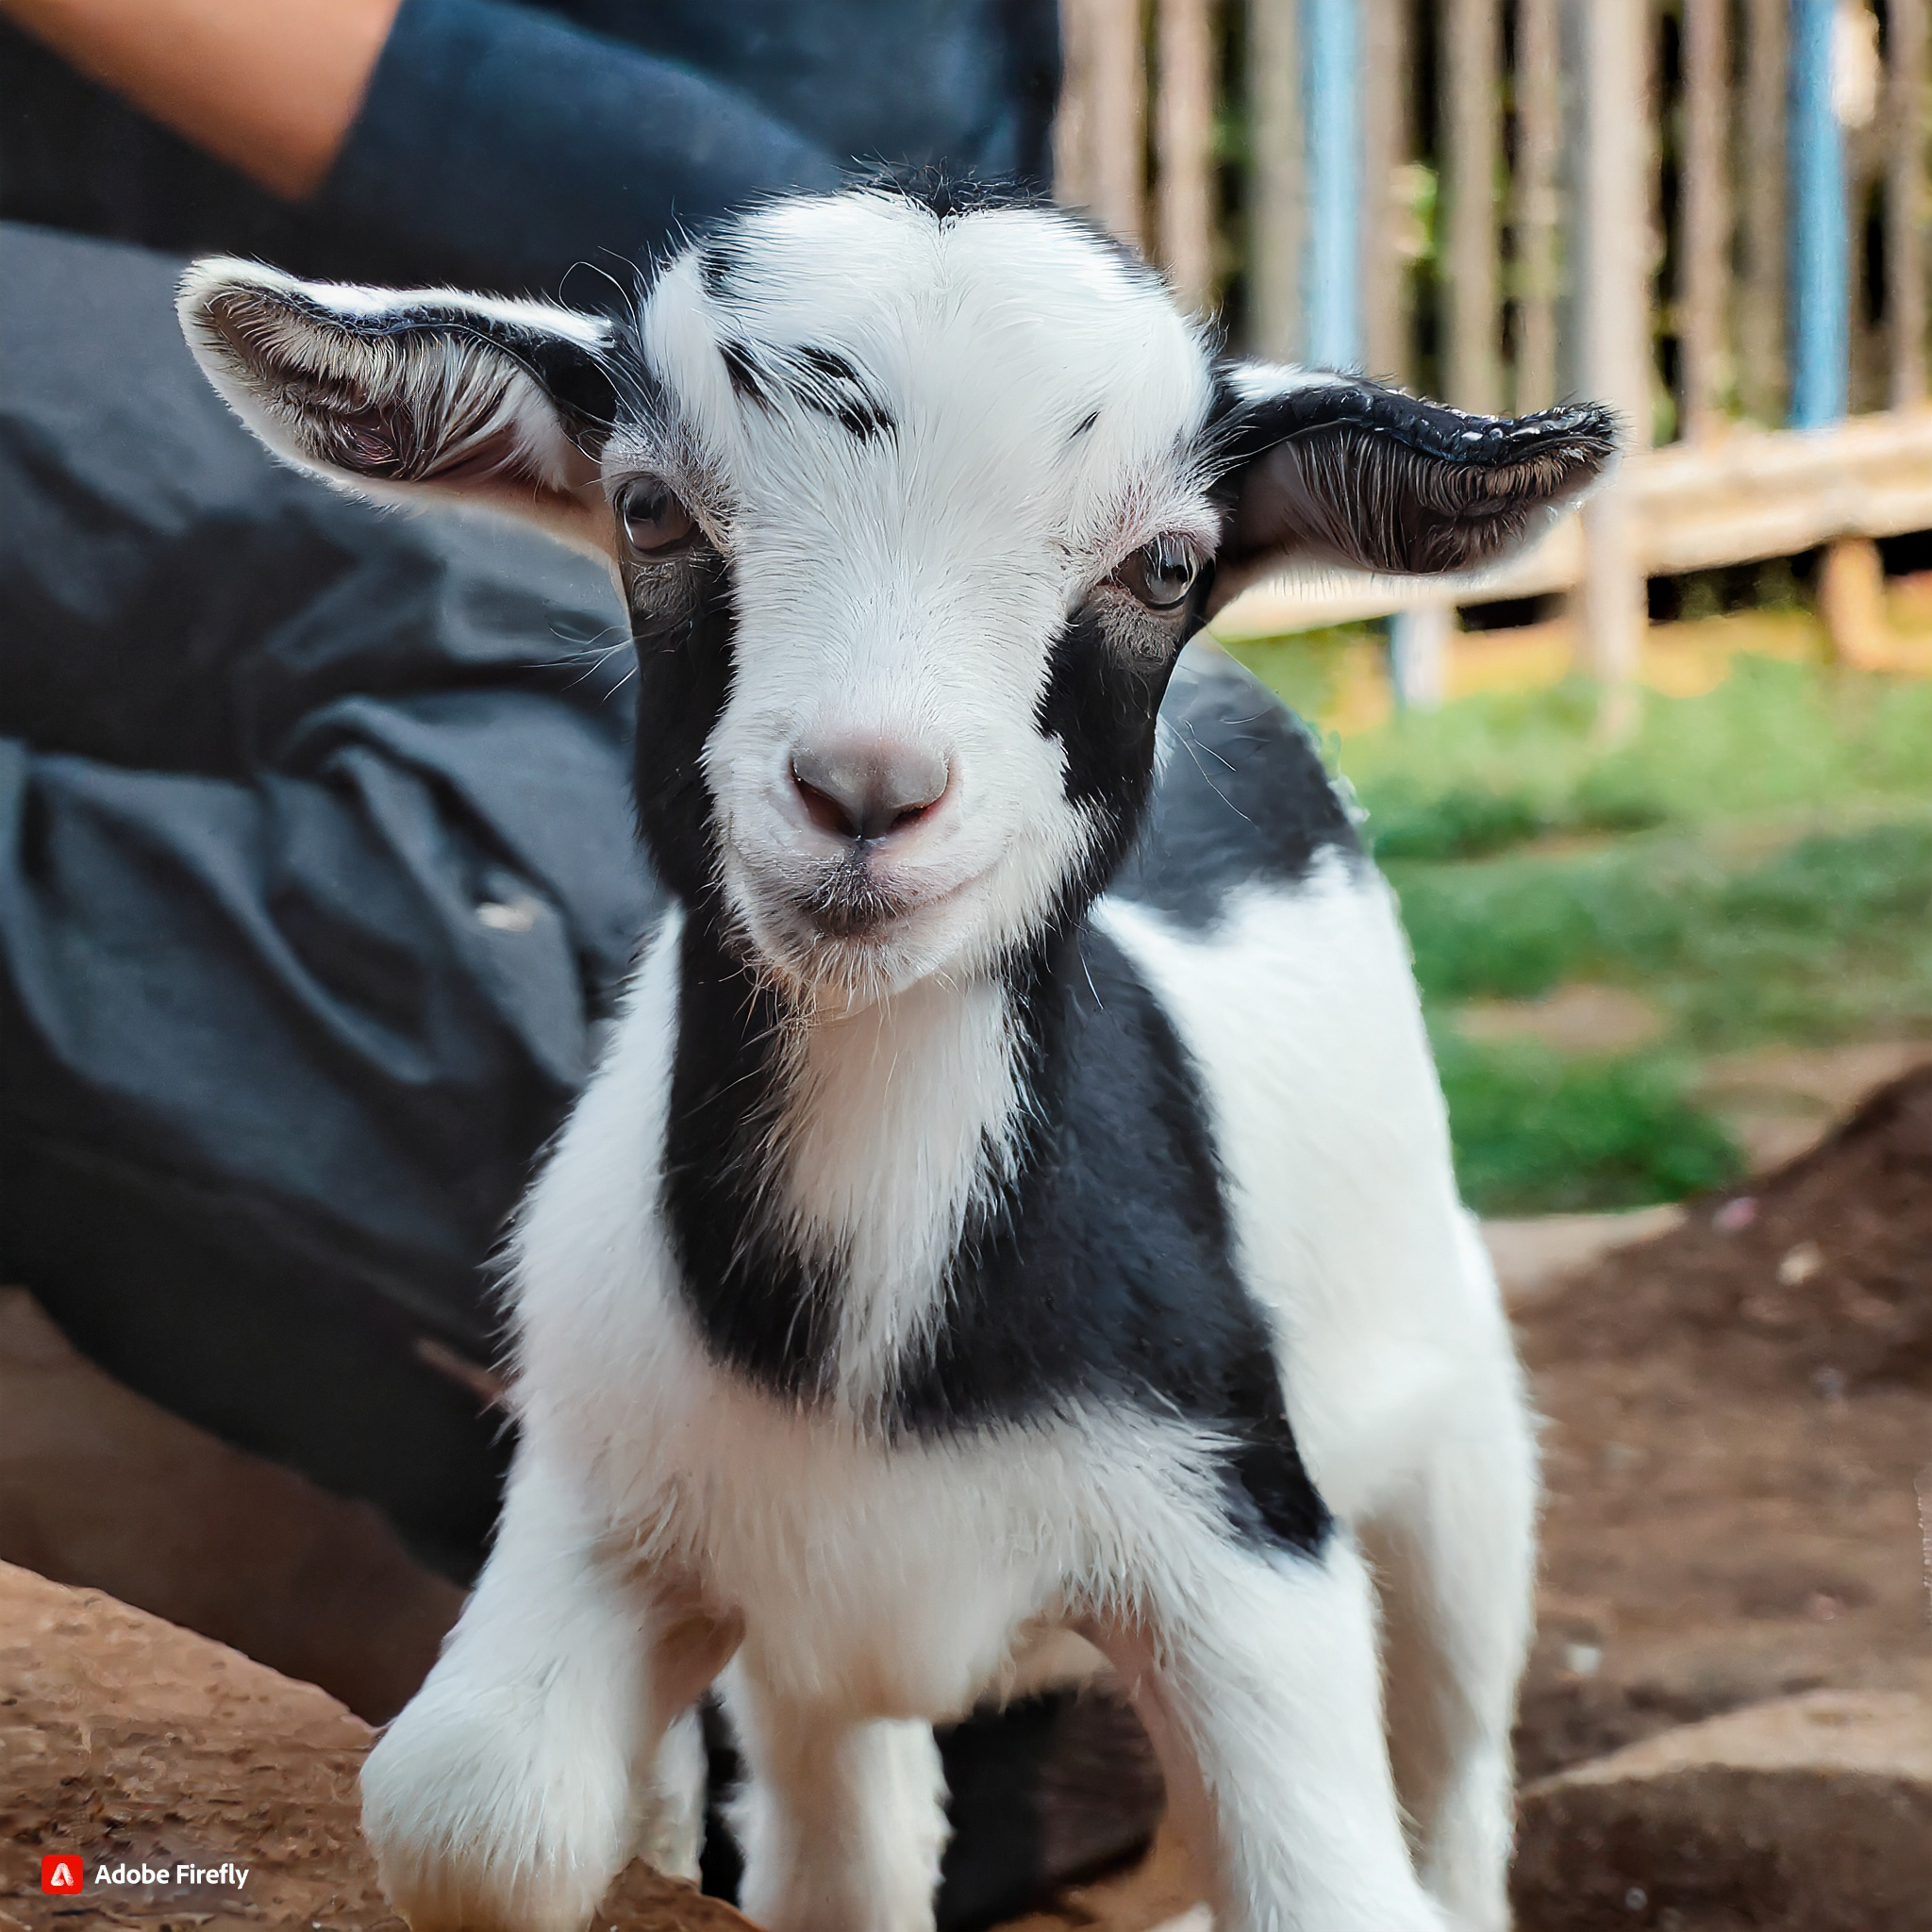 Care of a Baby Goat